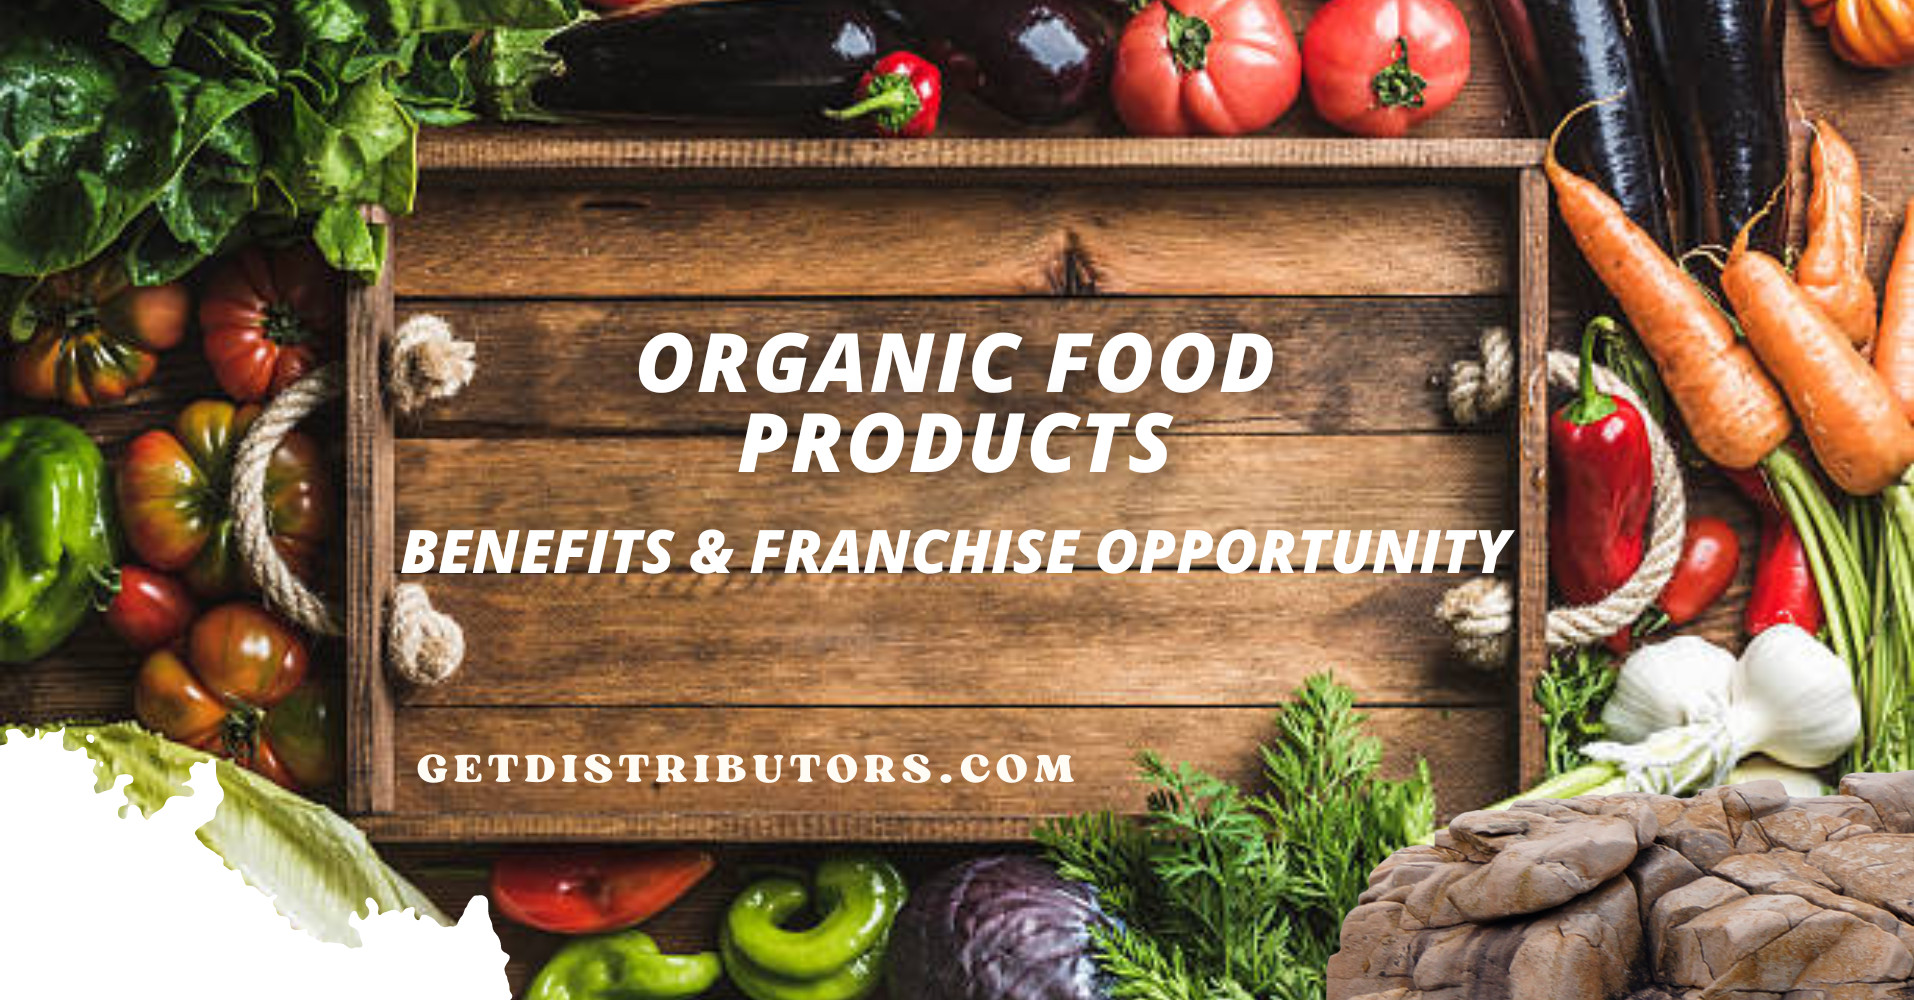 Organic Food Products: Benefits and Franchise Opportunity